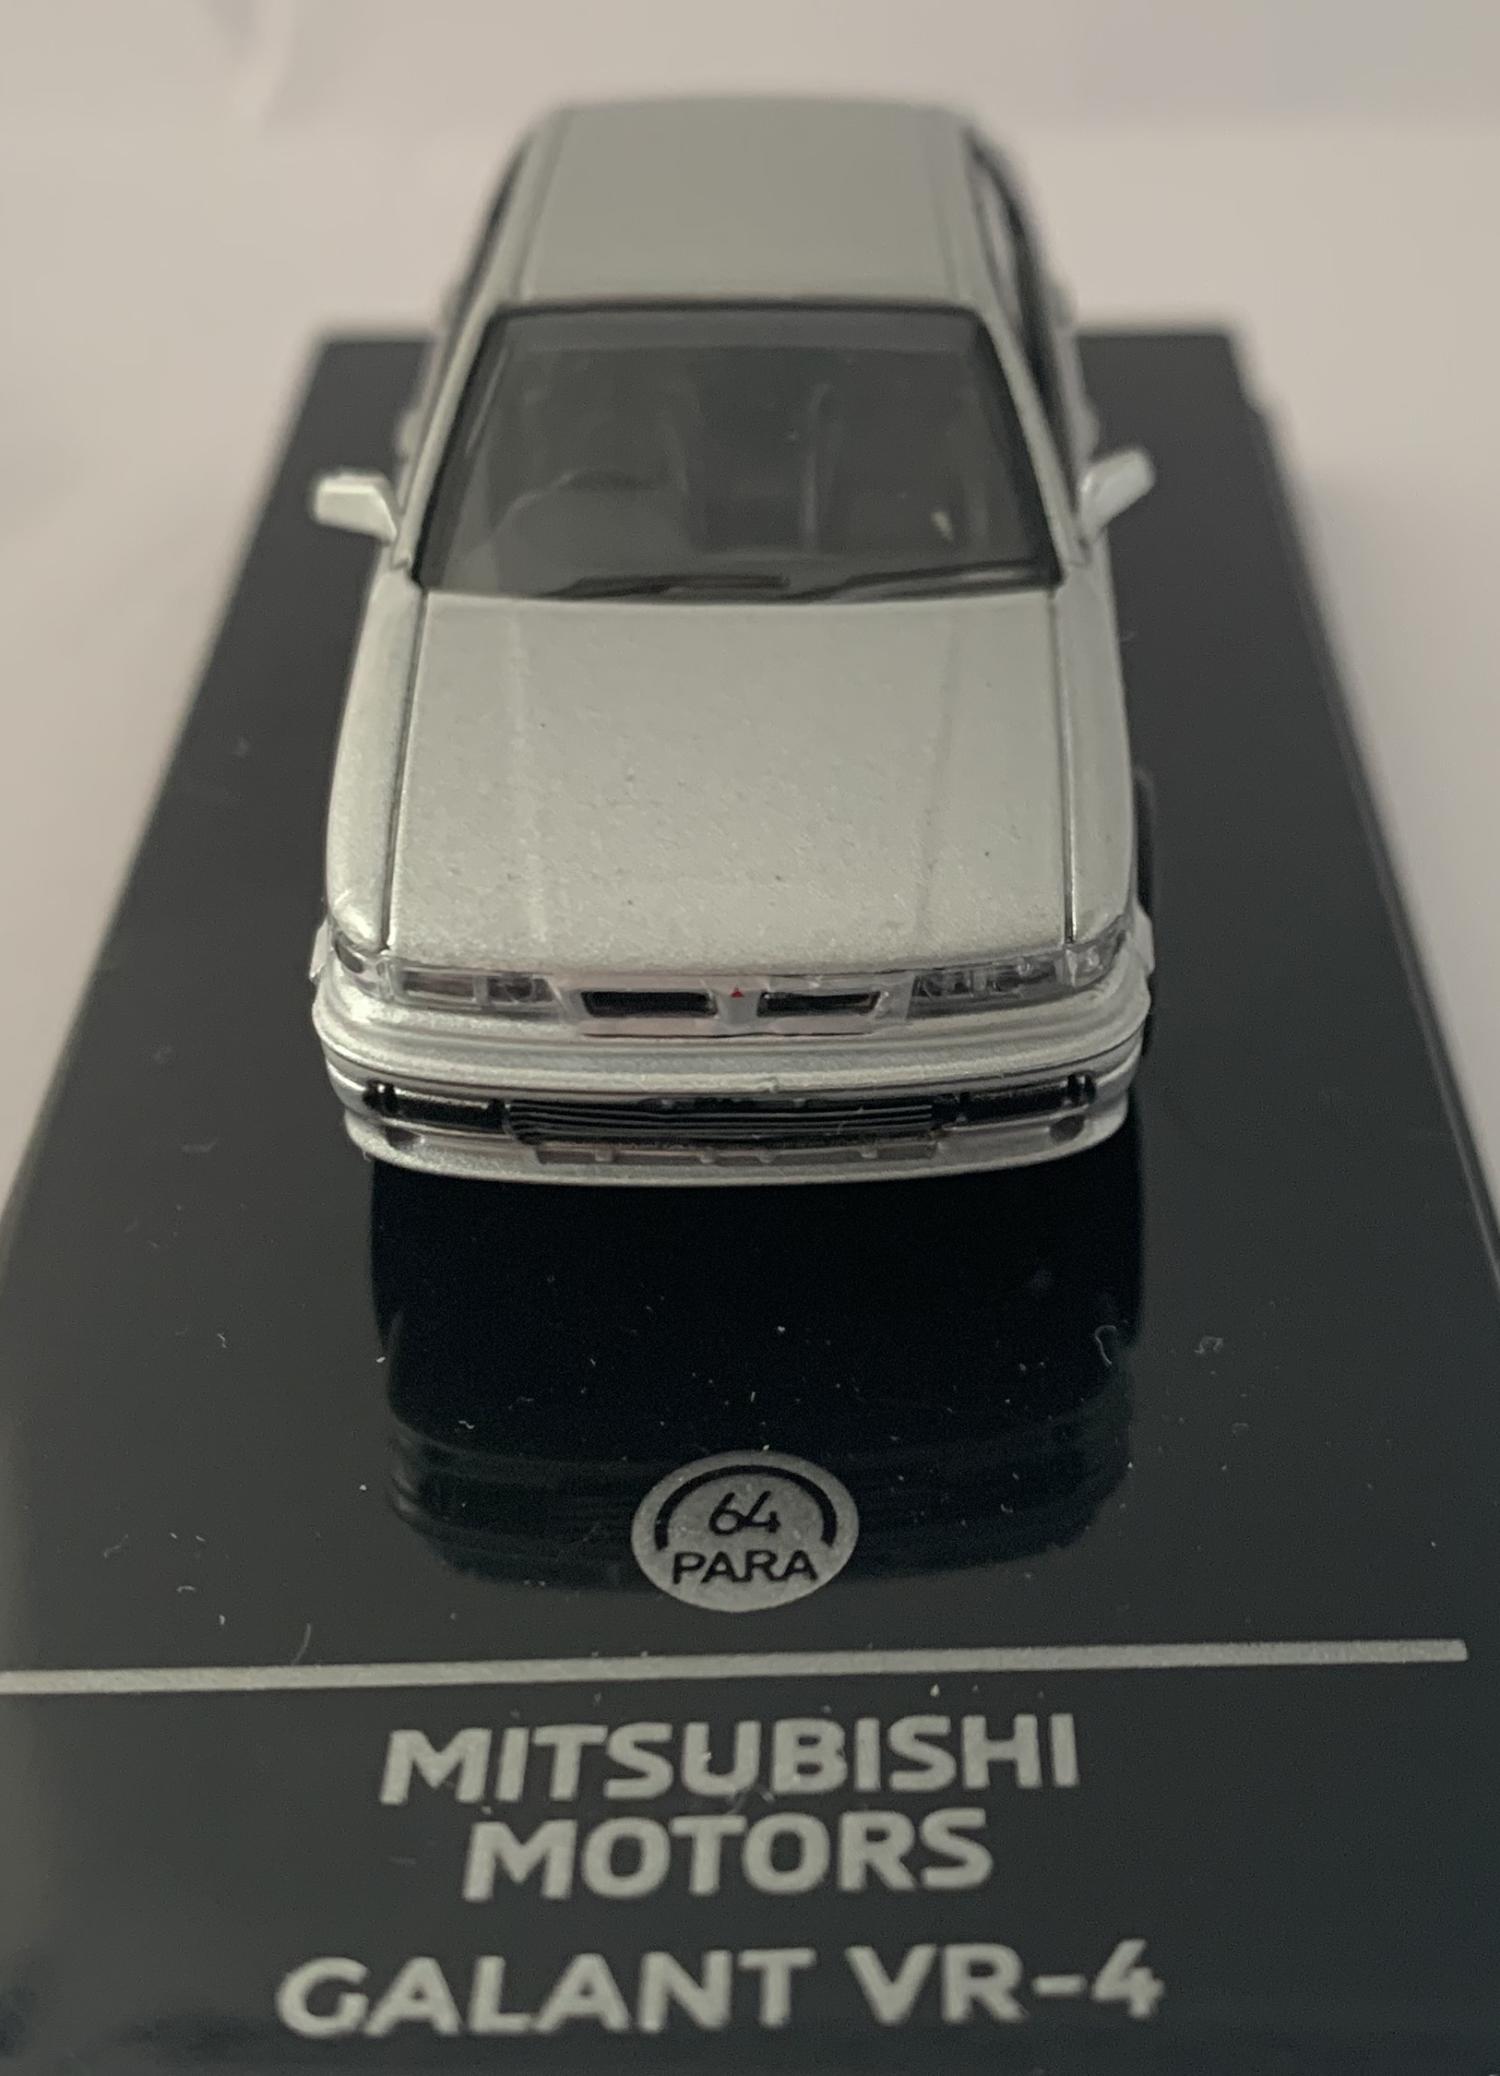 A good reproduction of the Mitsubishi Motors Galant VR-4 mounted on a removable plinth and a removable hard plastic cover